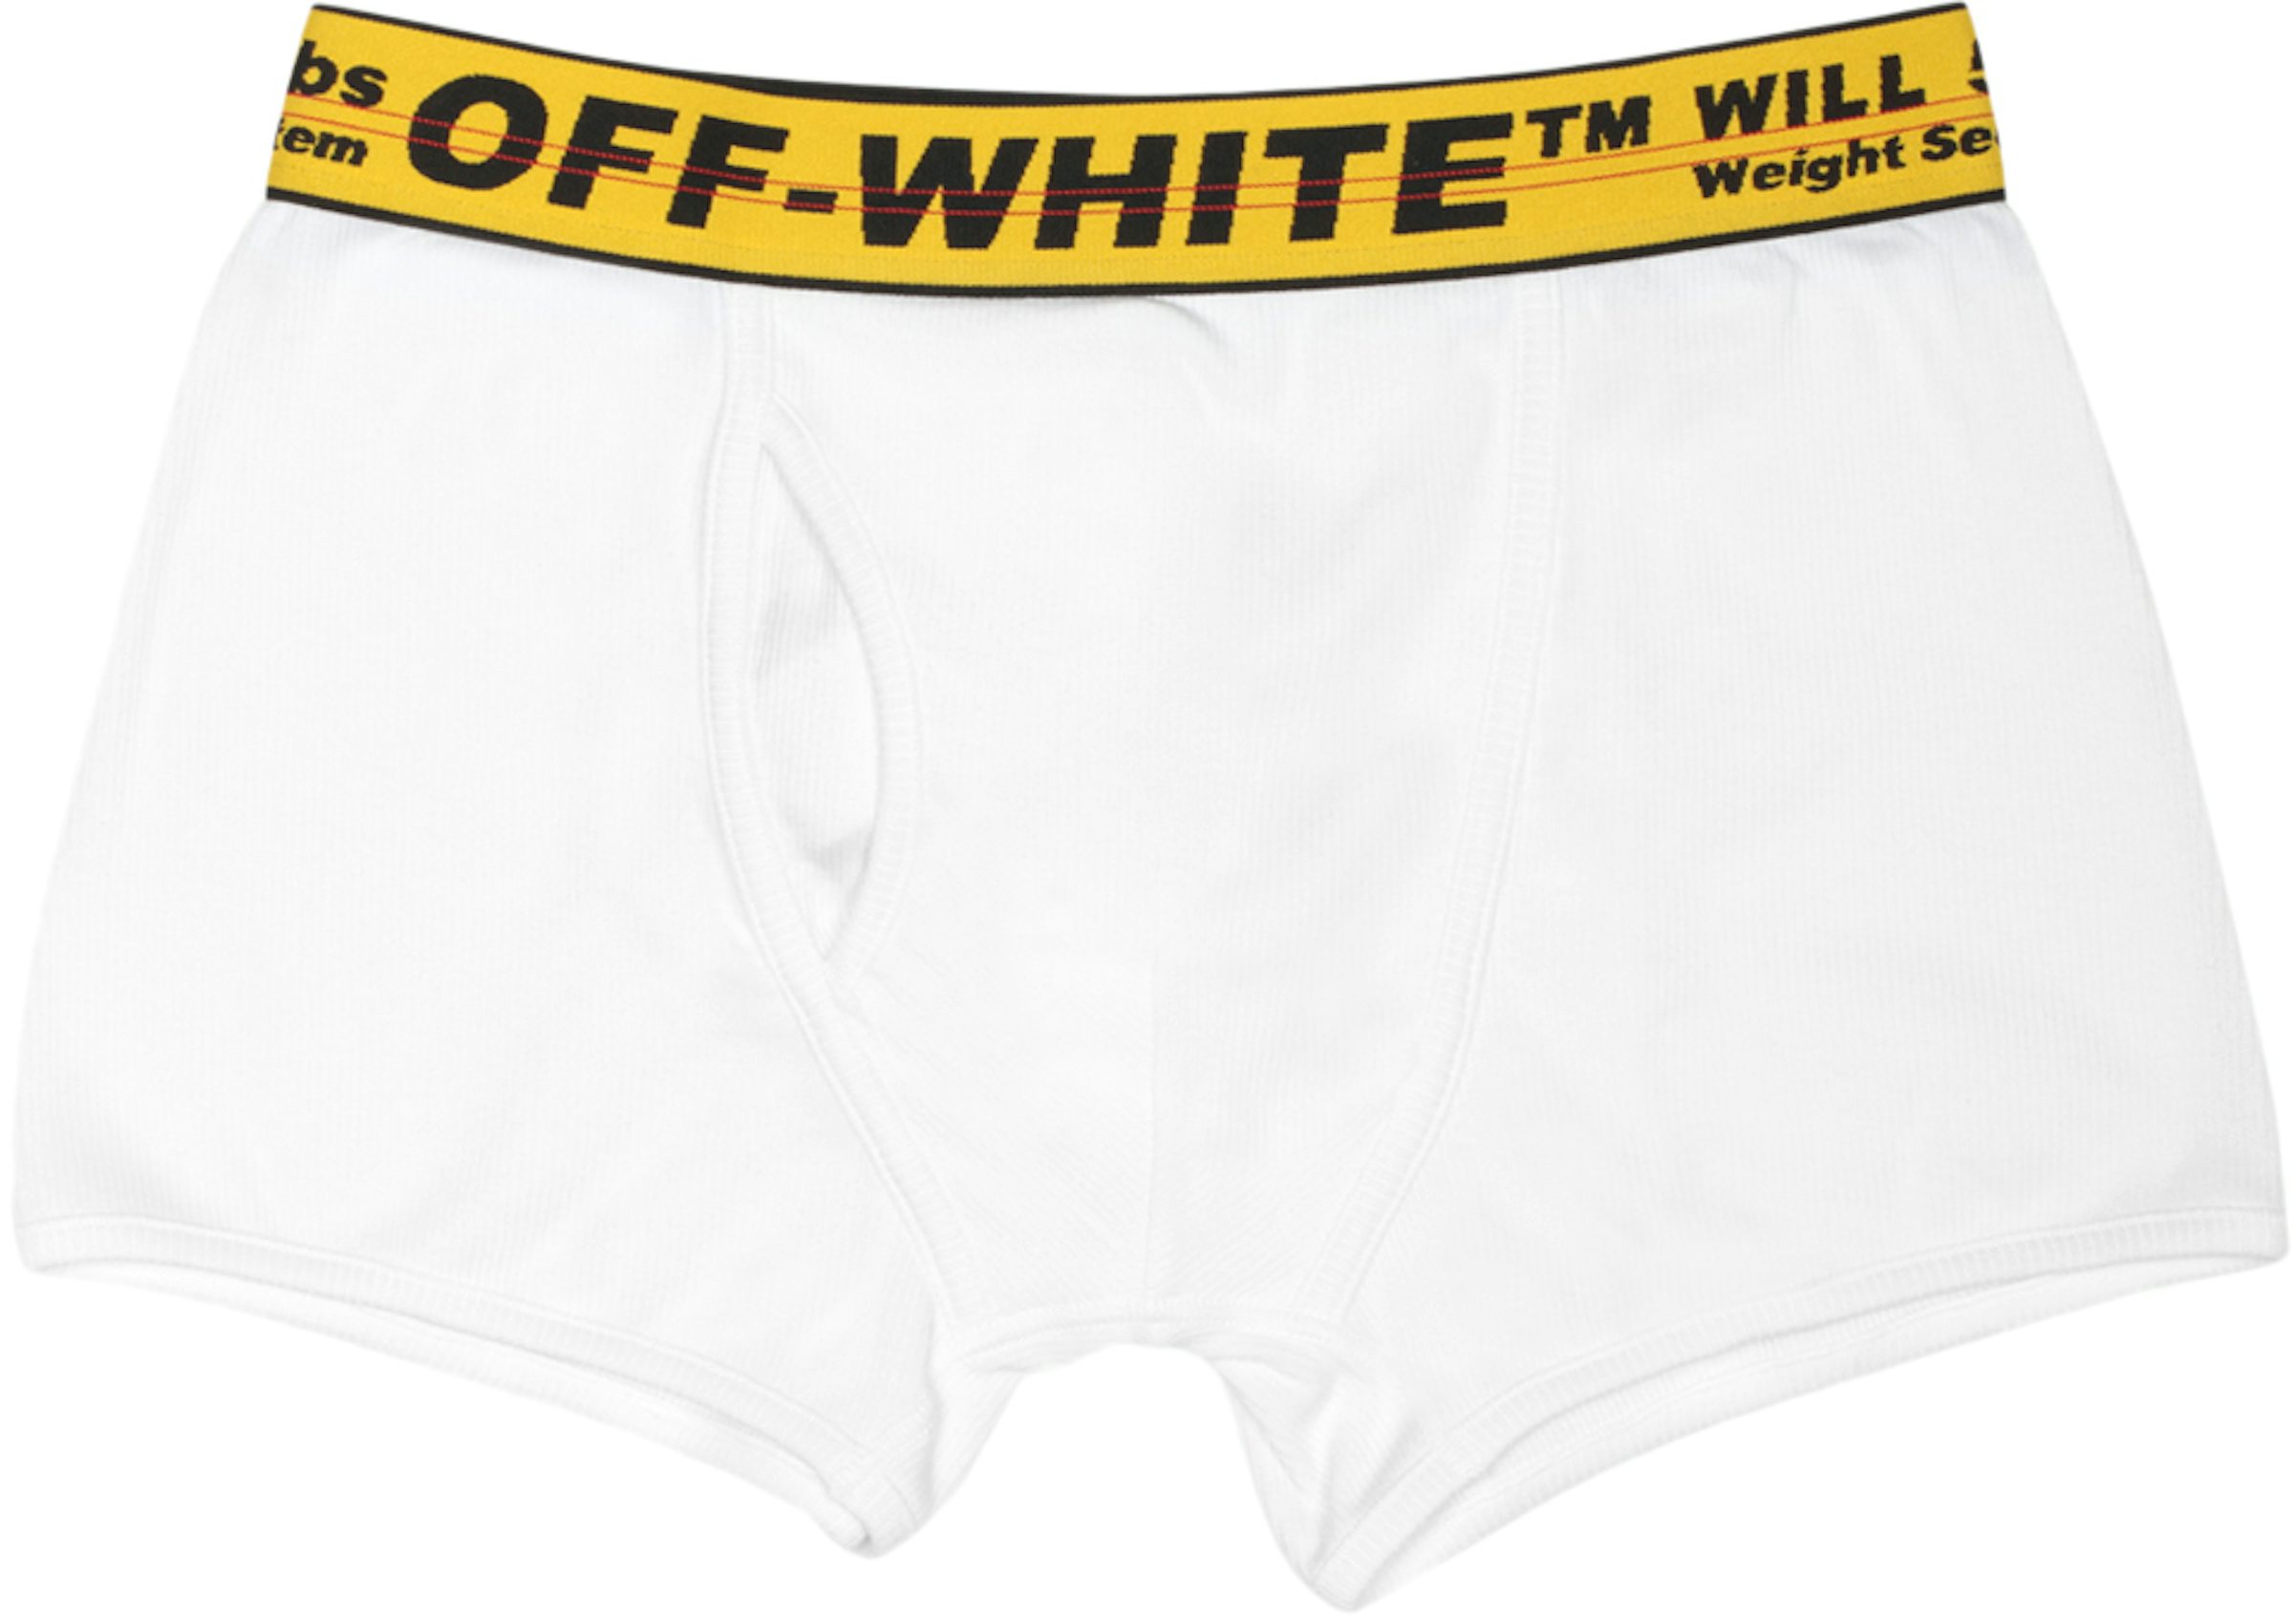 Off-White™ Drops Latest Round of SS19 Exclusives on SSENSE